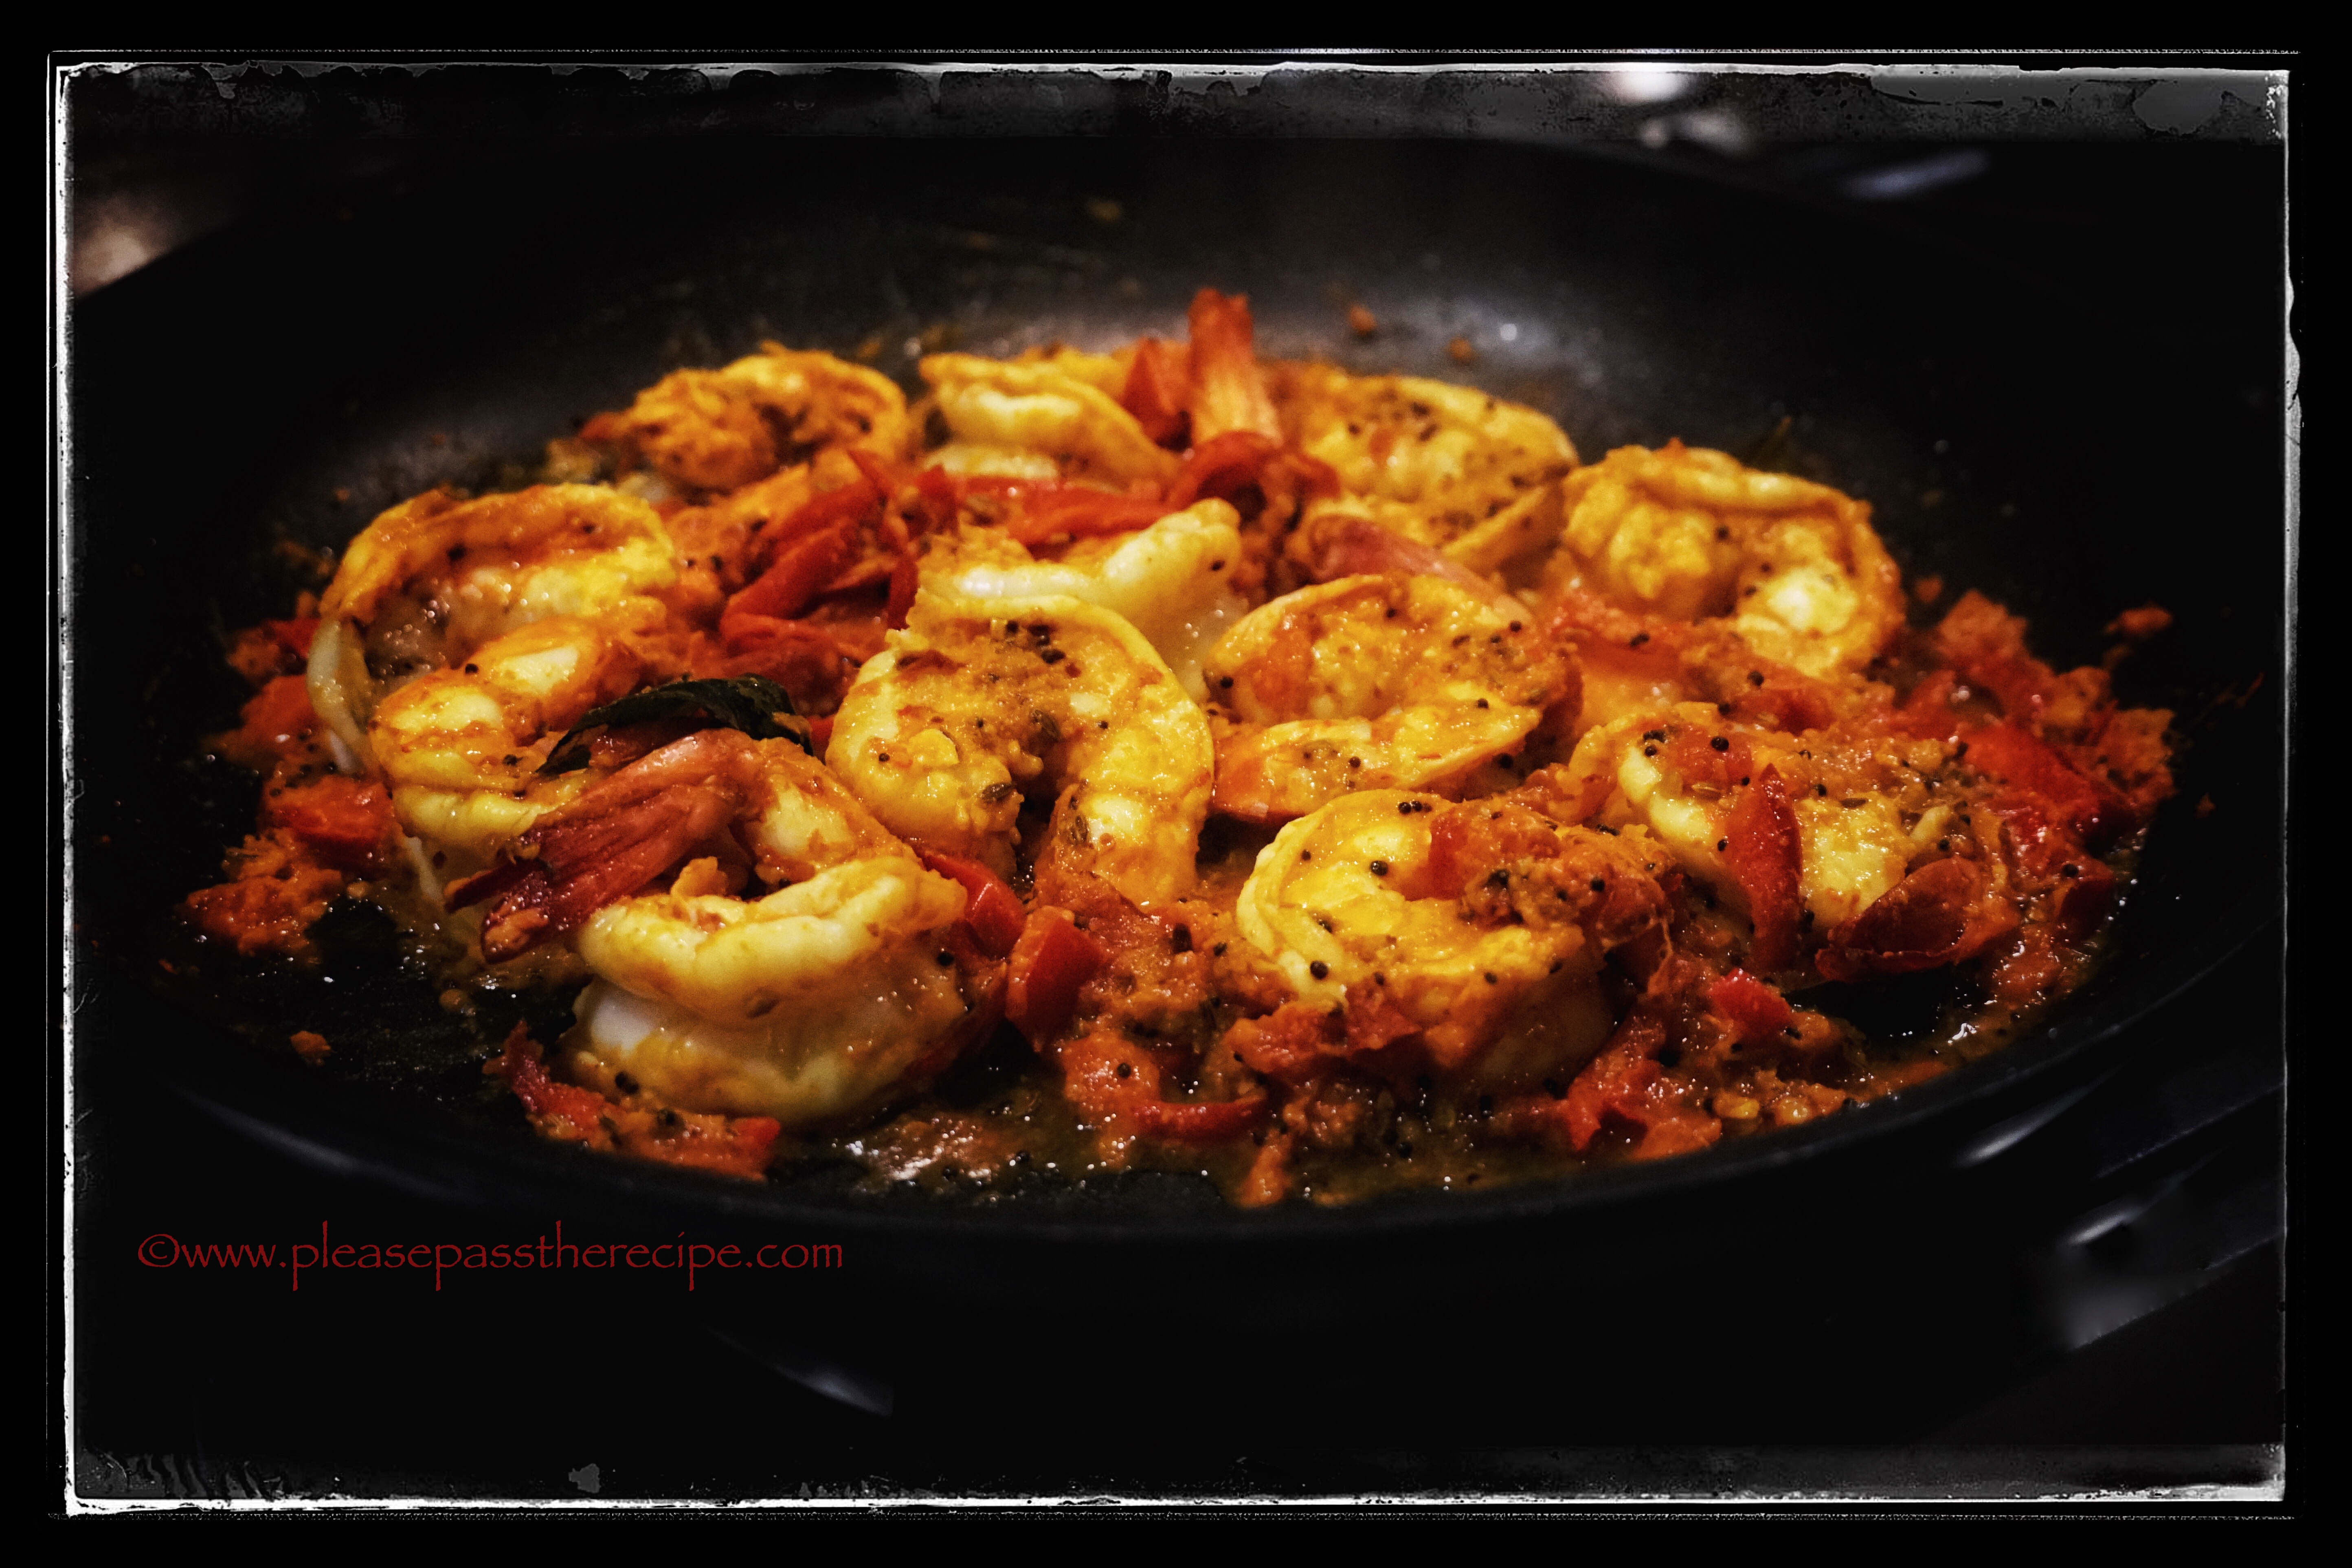 Spiced prawns and peppers